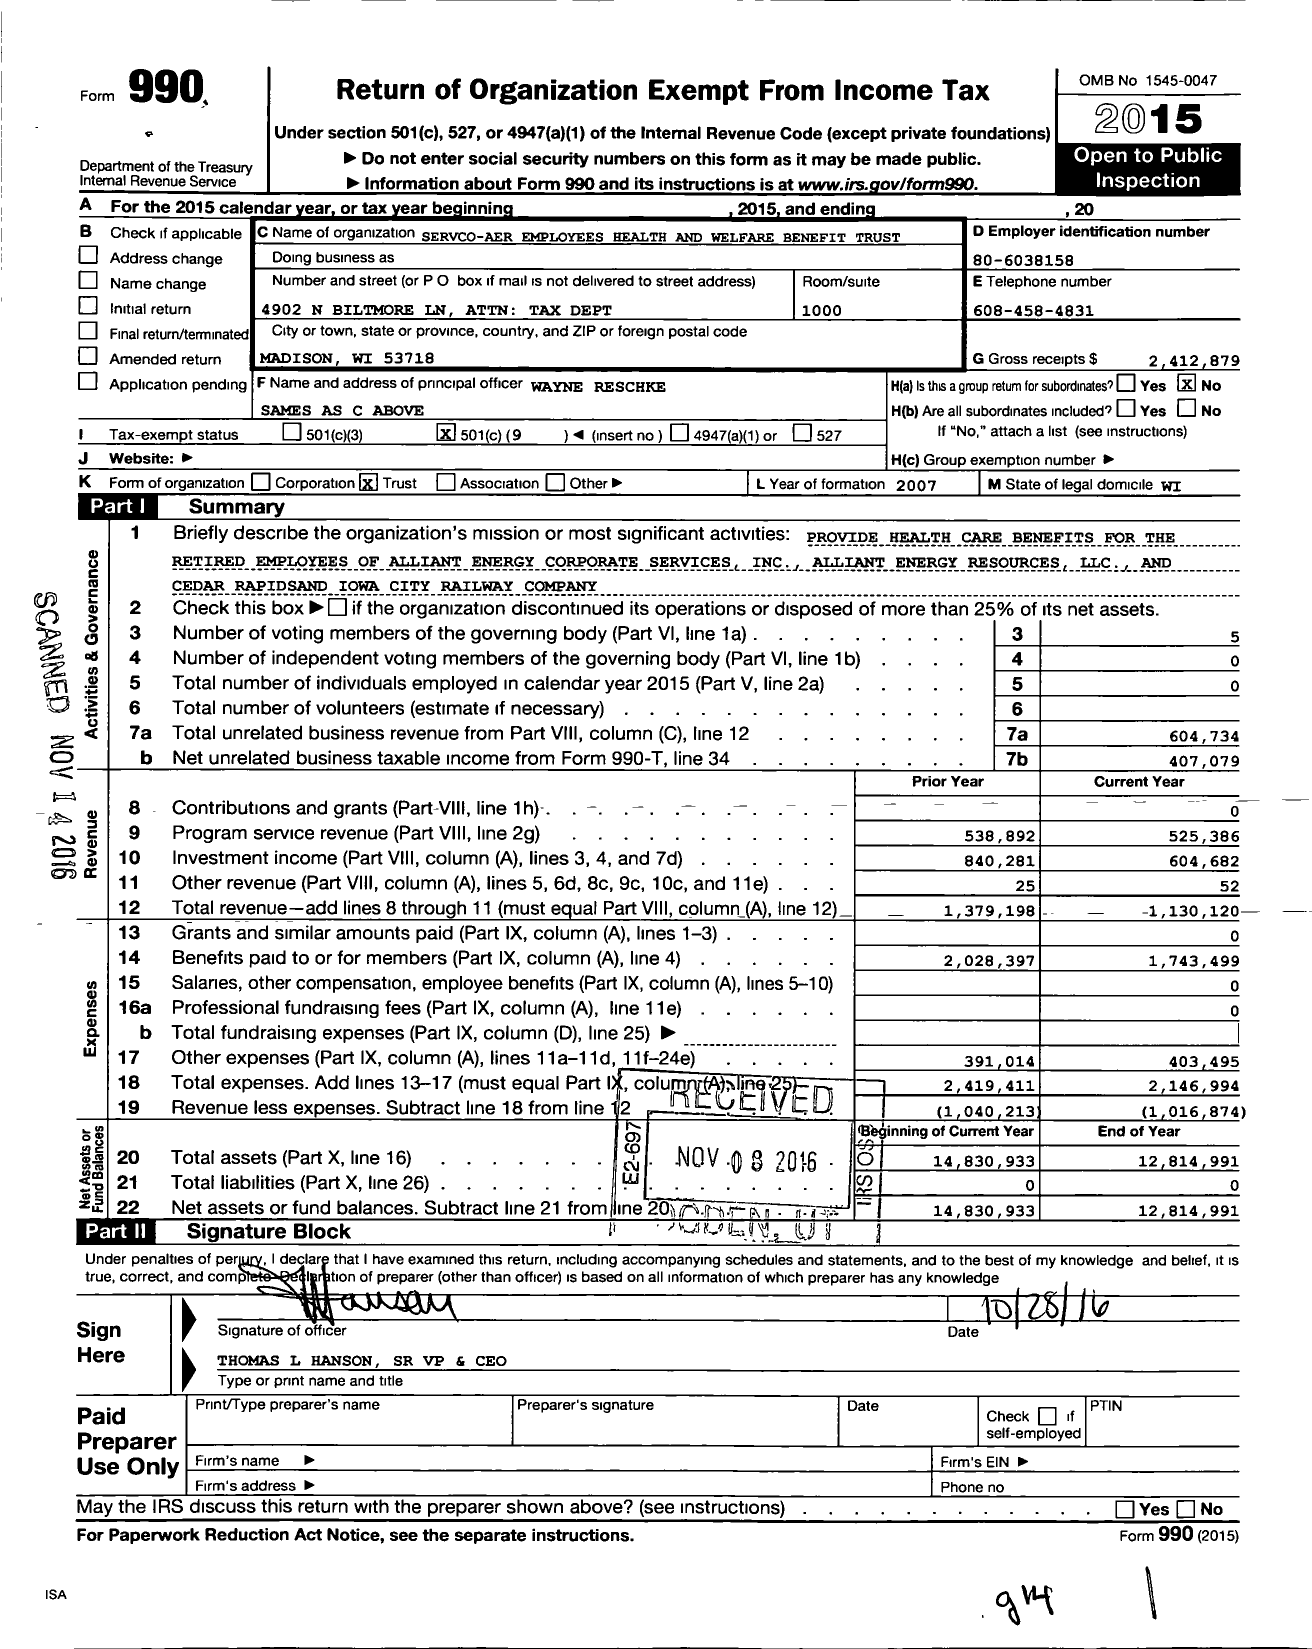 Image of first page of 2015 Form 990O for Servco-Aer Employees Health and Welfare Benefit Trust